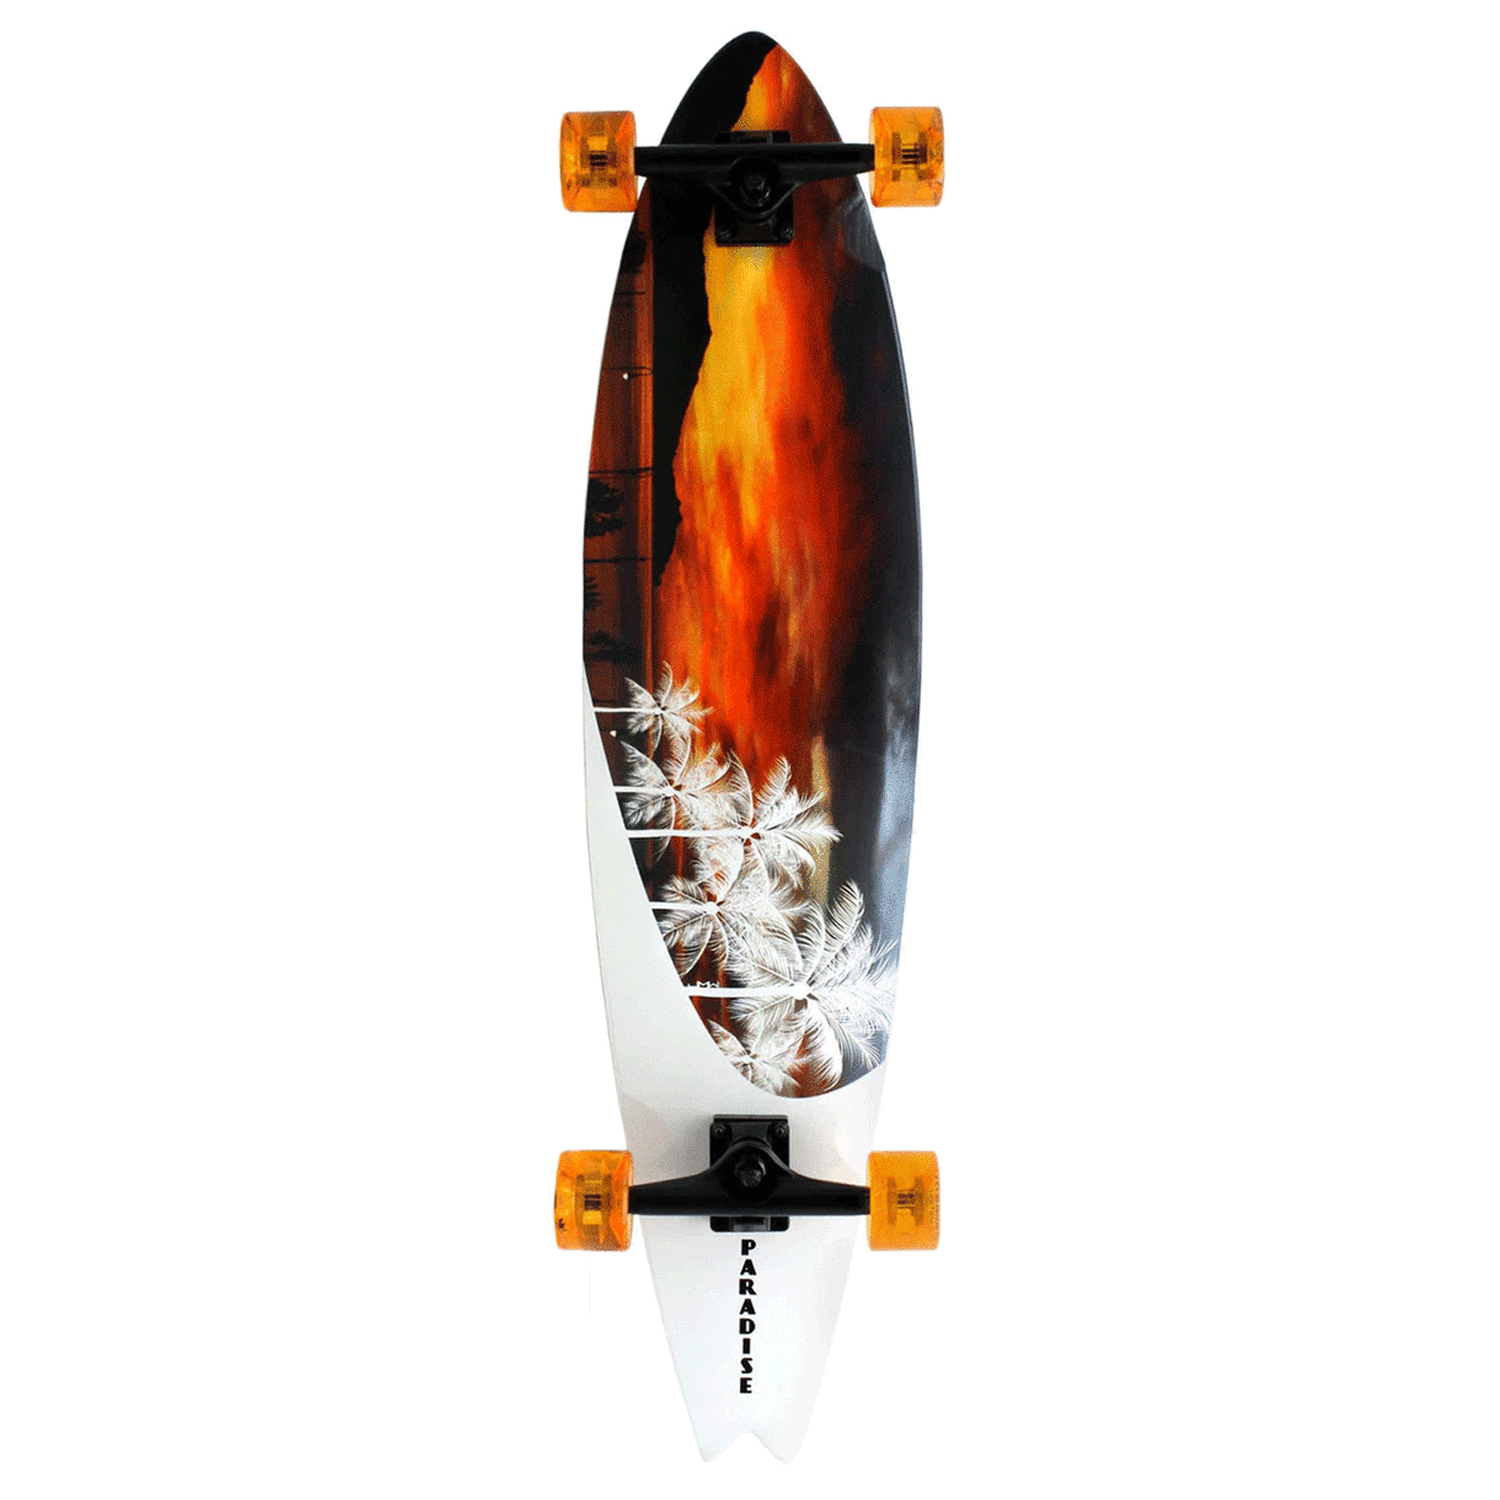 Paradise Pintail Longboards